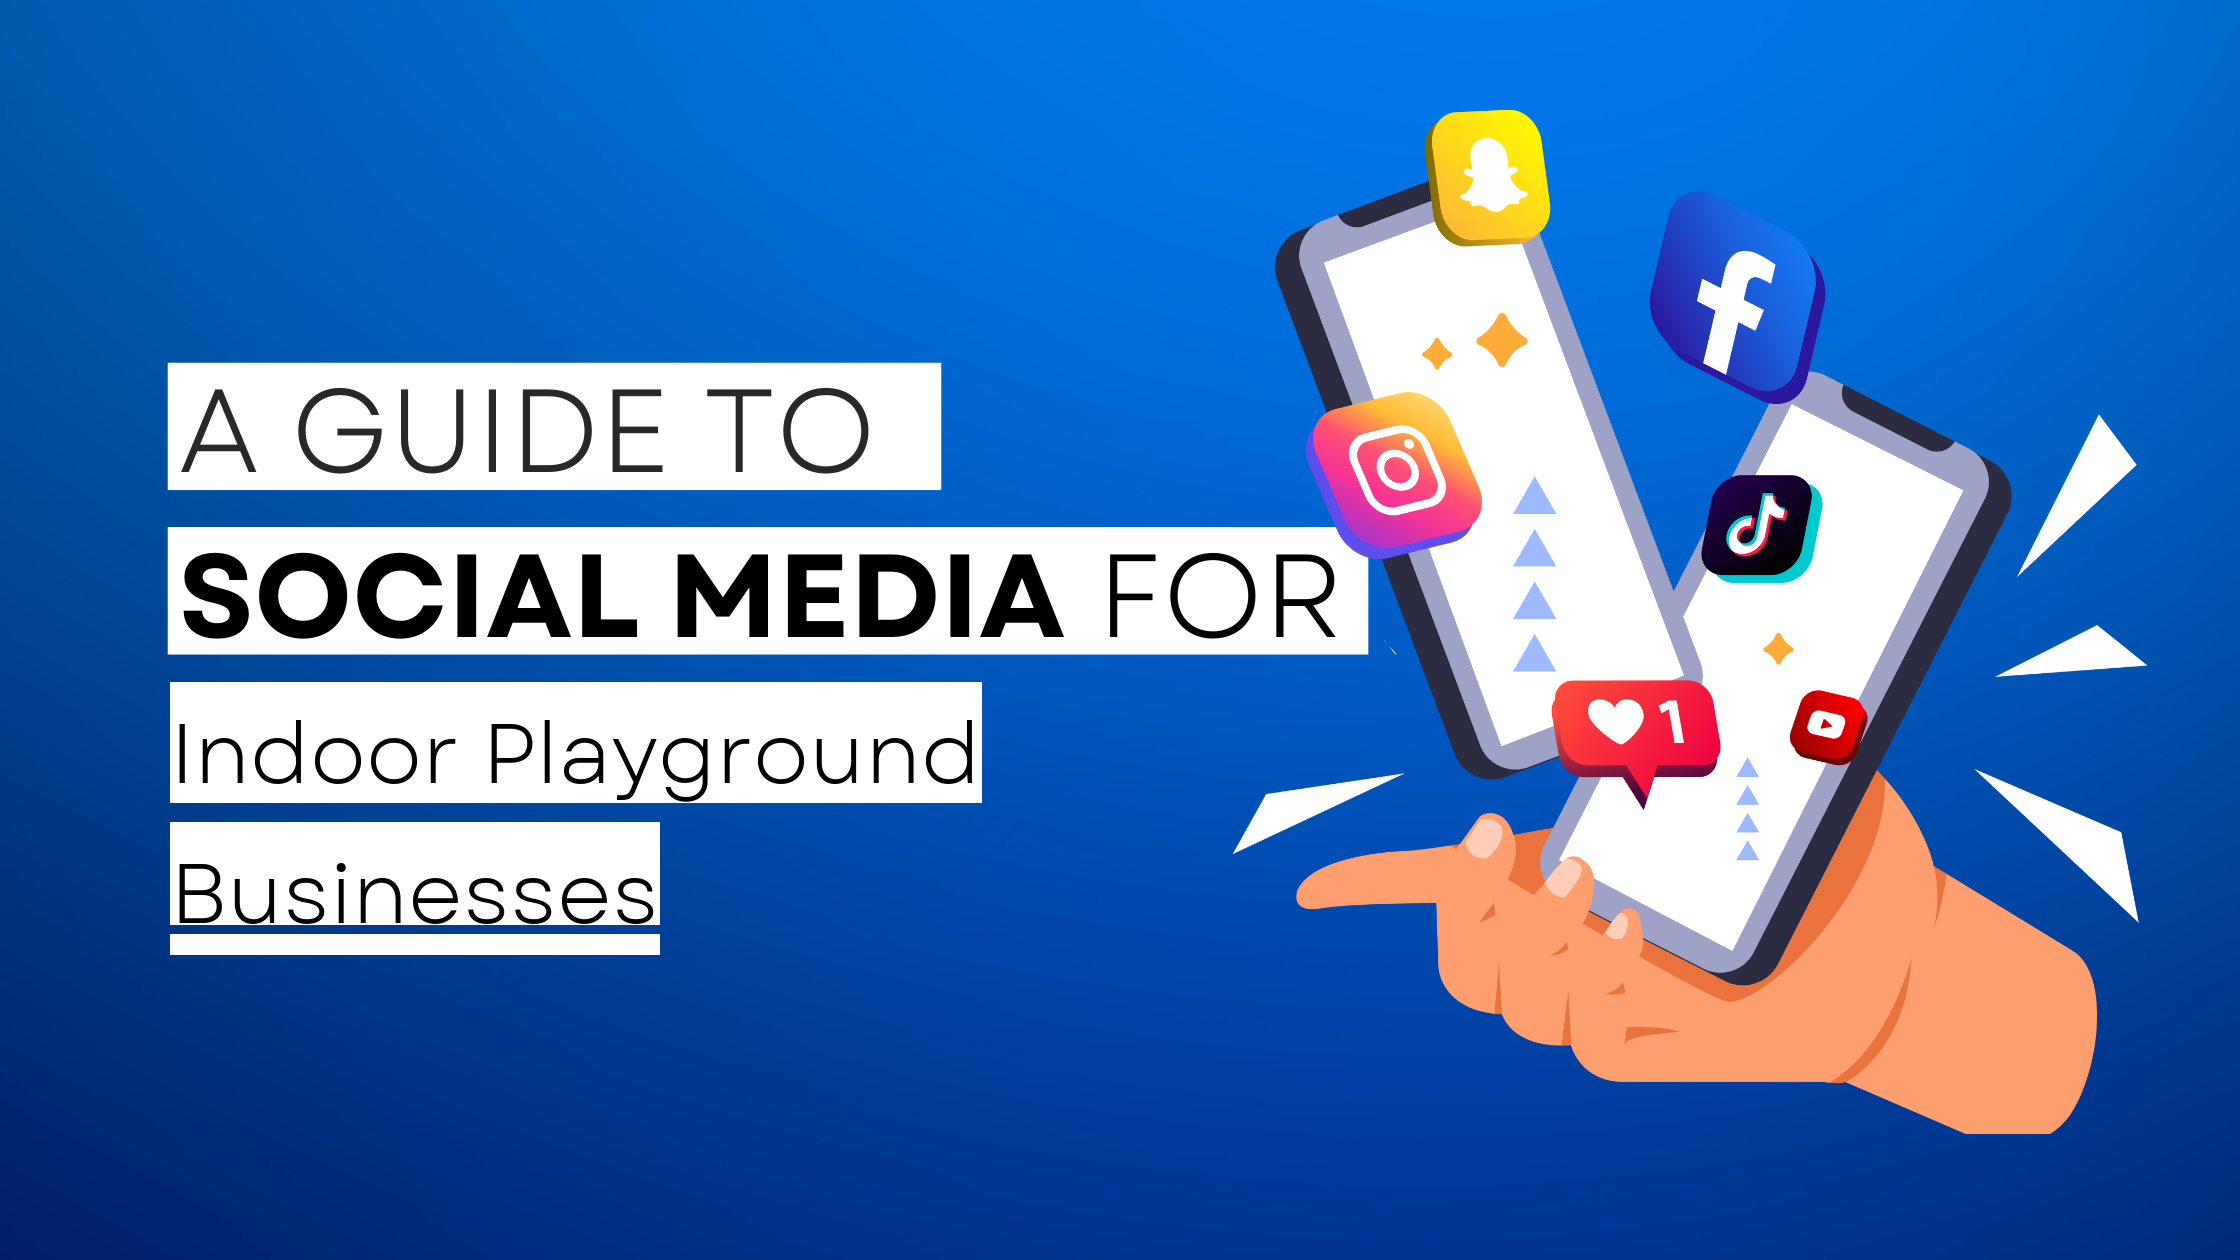 How to start Indoor Playground on social media